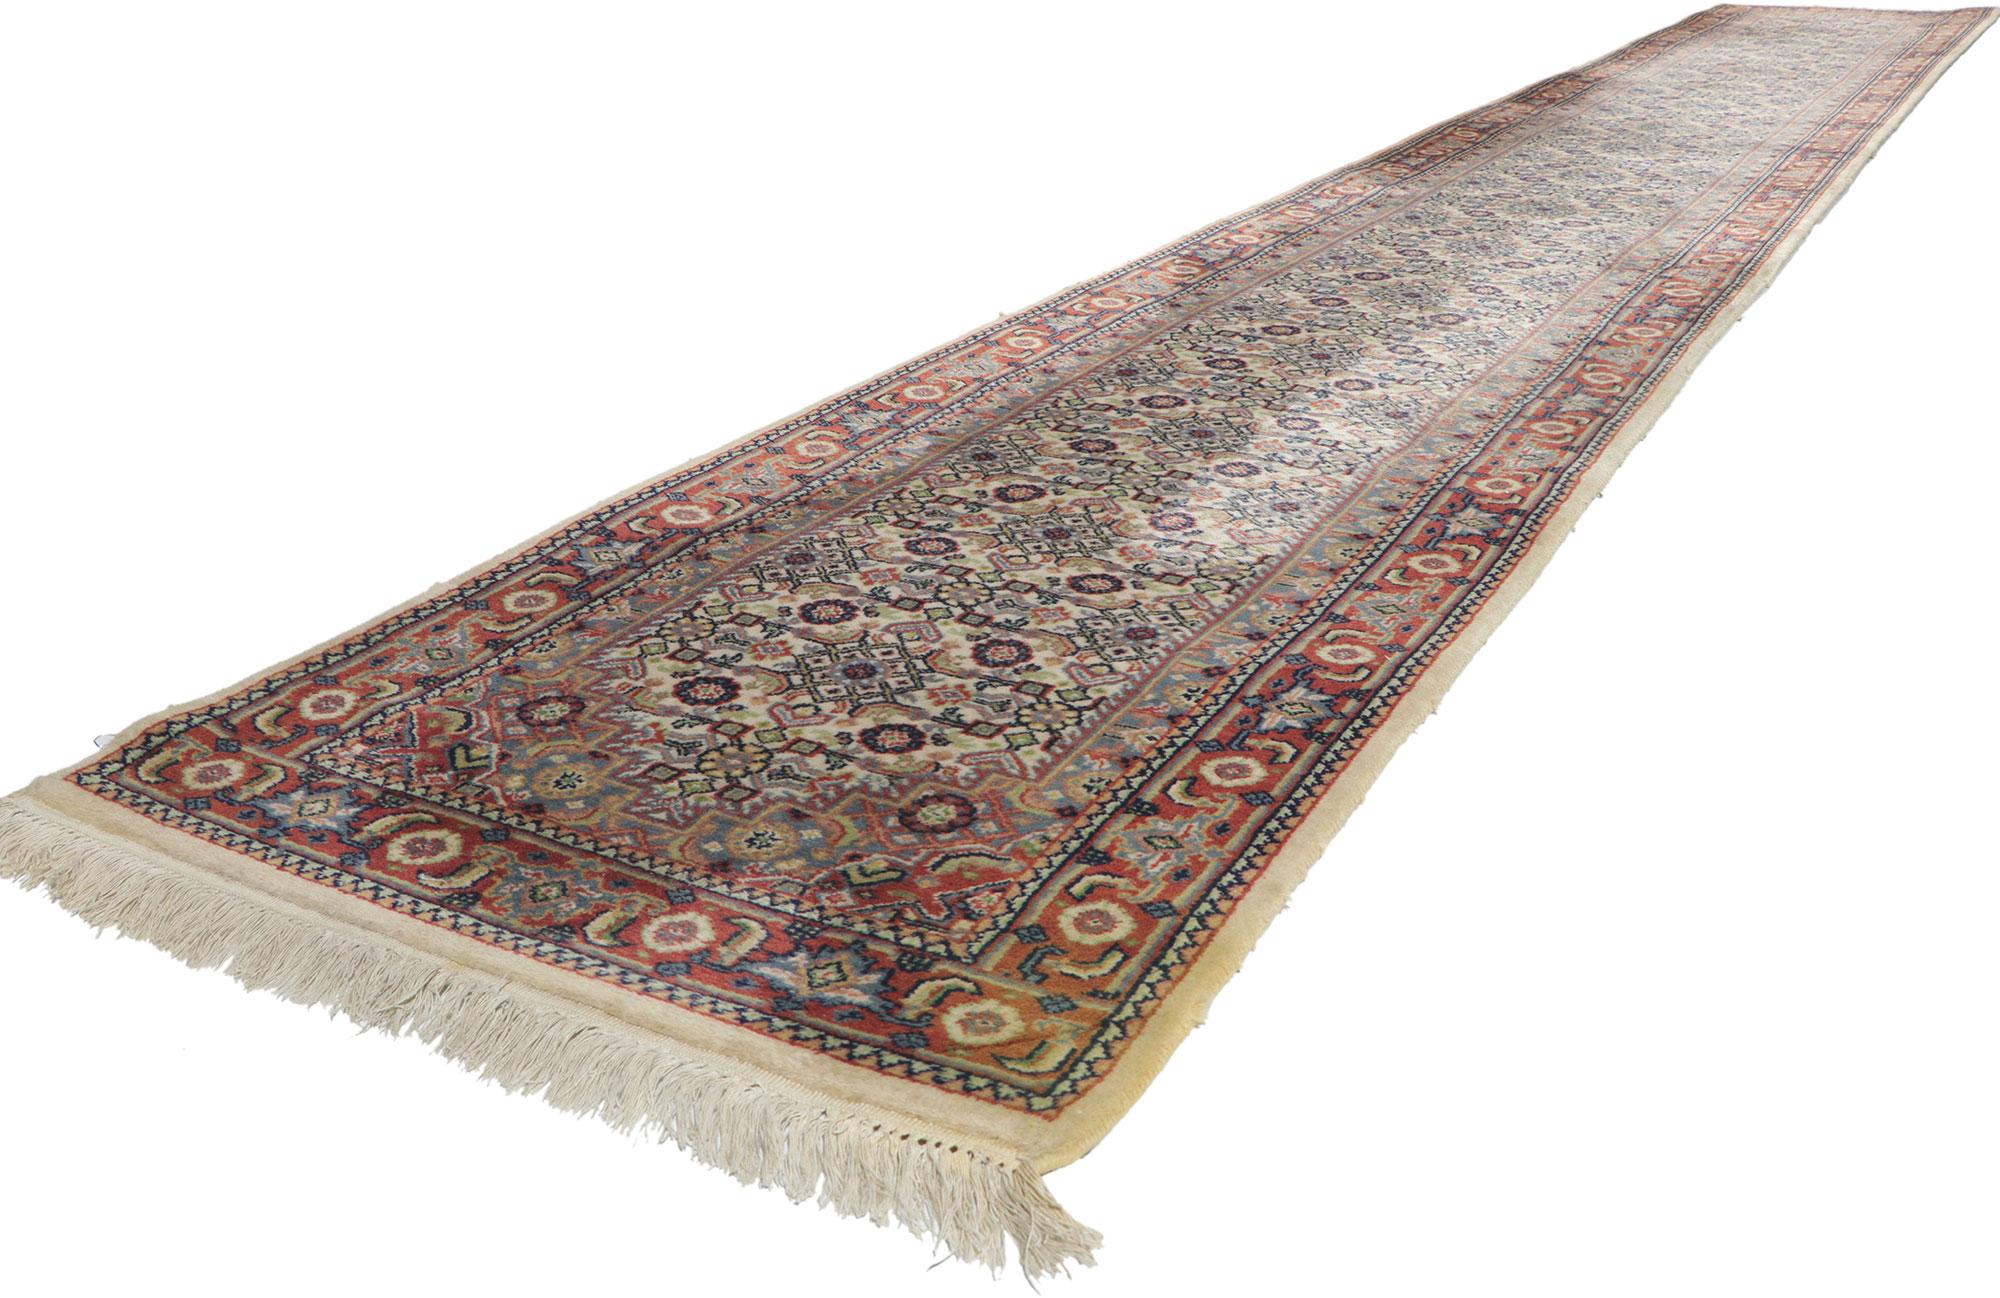 78298 Extra-Long Vintage Indian Bijar Runner, 02'08 x 19'07.
The hand-knotted wool vintage Indian Bijar rug runner combines traditional sensibility with bucolic charm. Its small-scale boteh design and light earthy hues intertwine to create a rustic